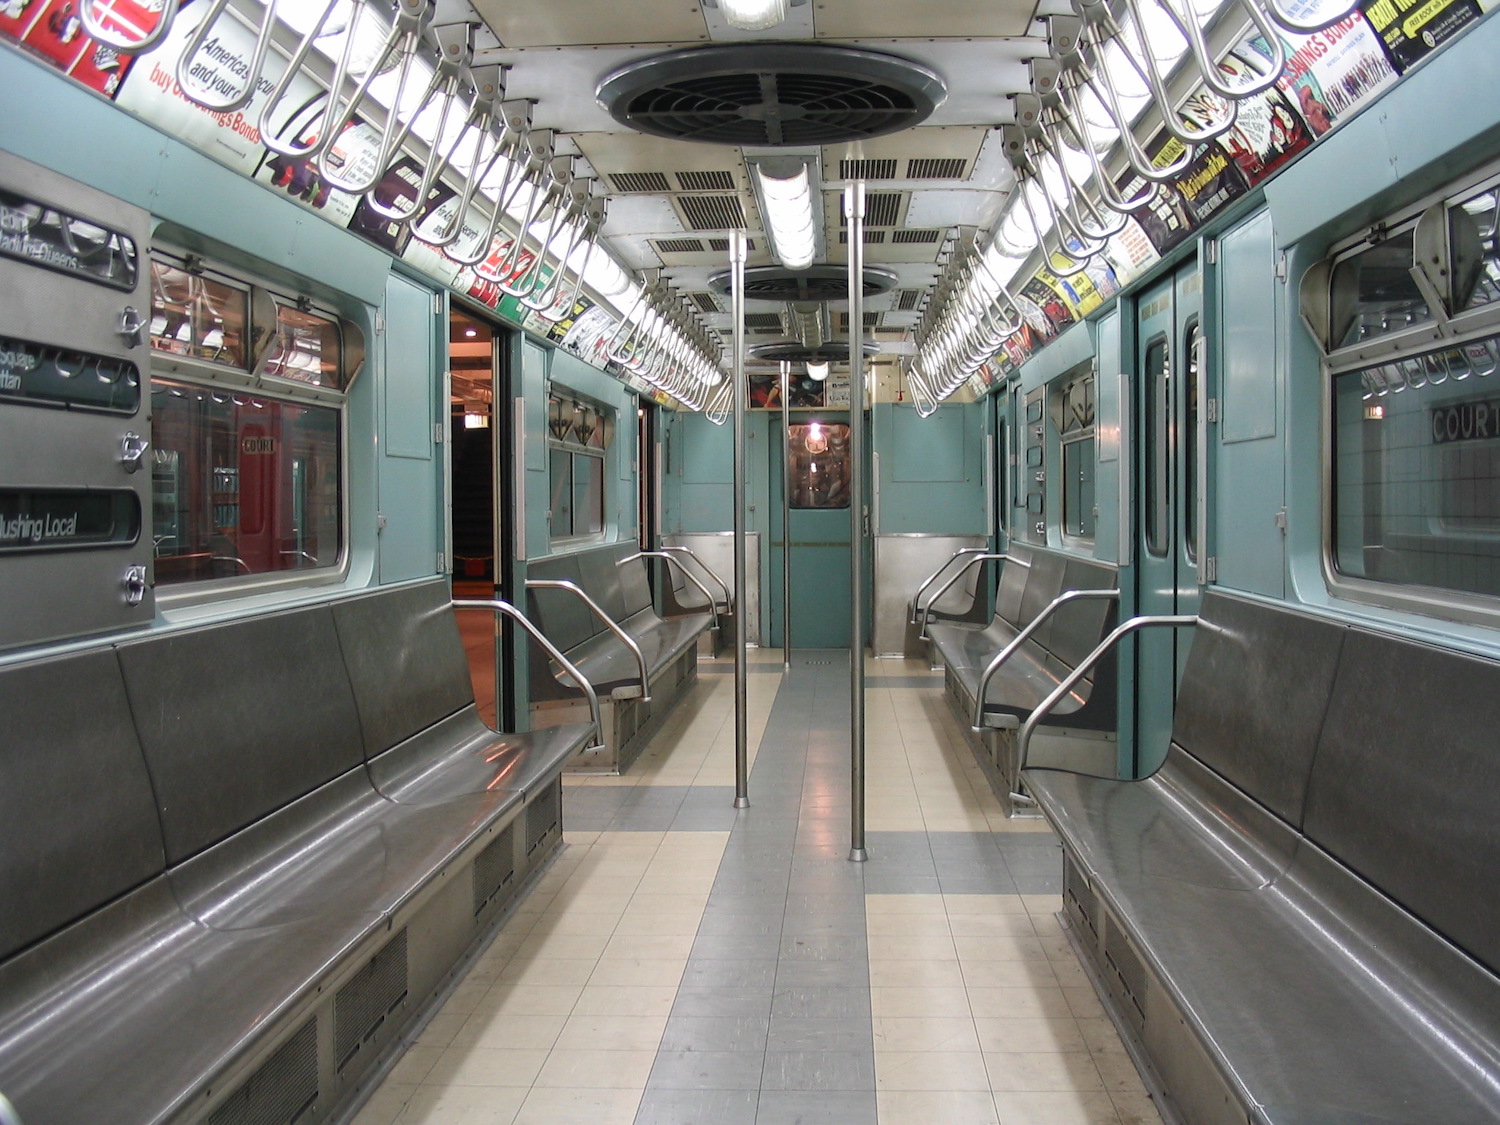 The interior of a subway car with light blue walls and gray bench chairs.